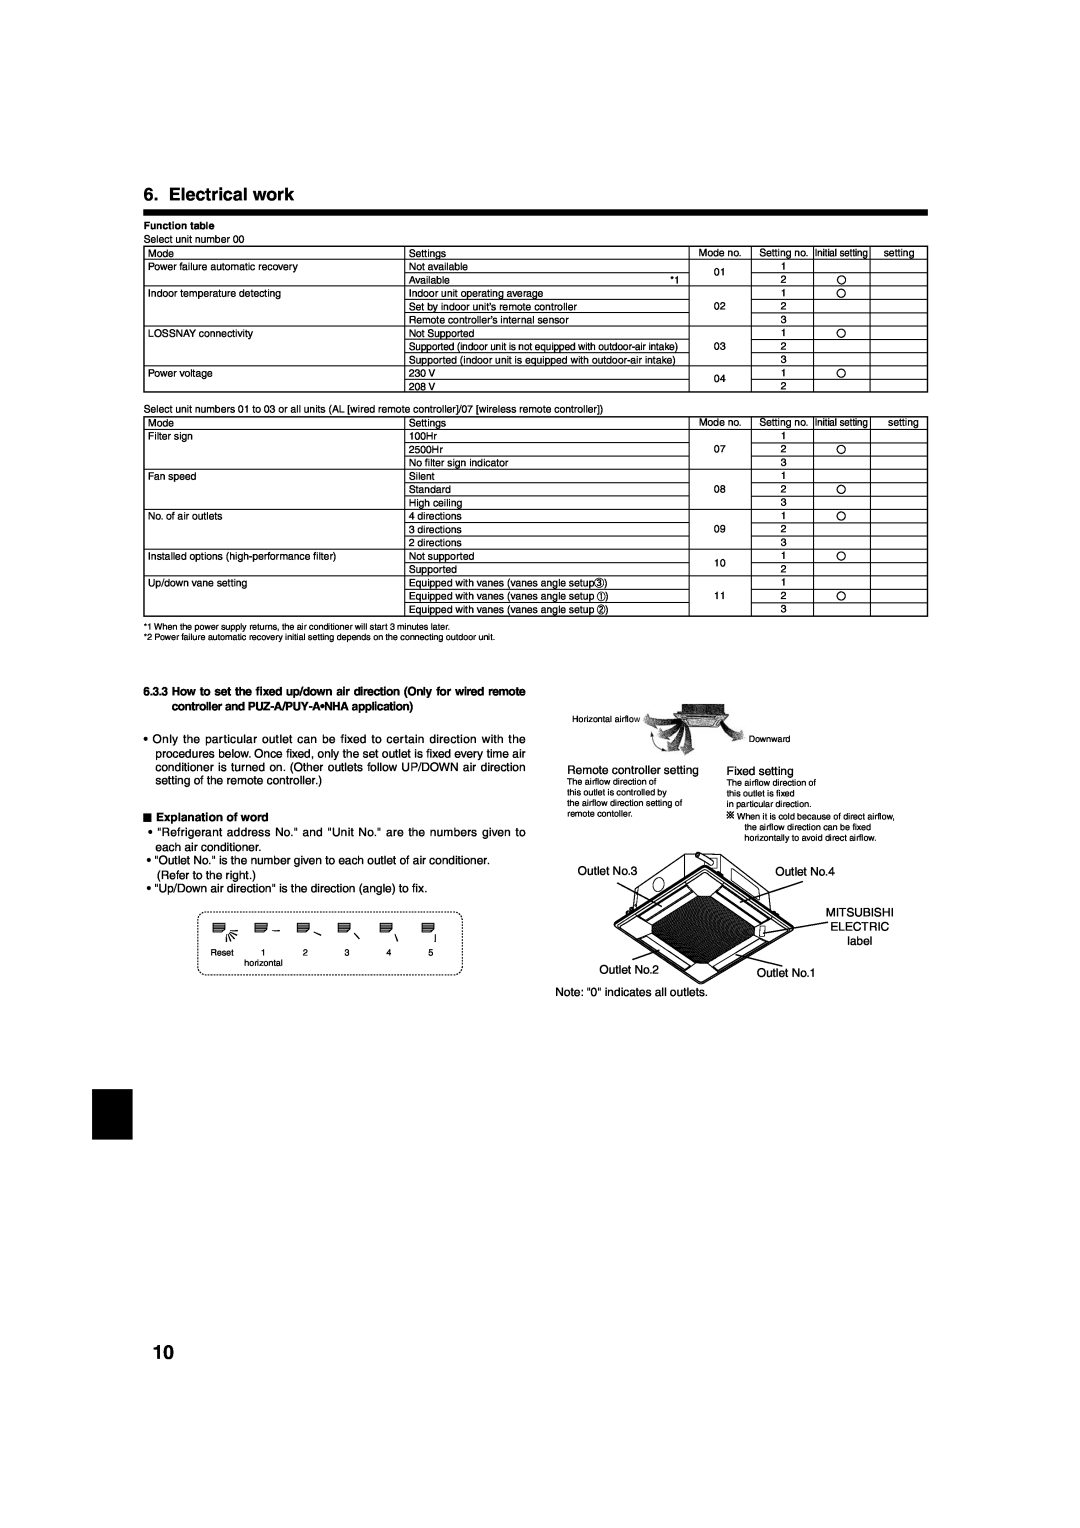 Mitsumi electronic PLA-ABA installation manual Electrical work, Explanation of word 